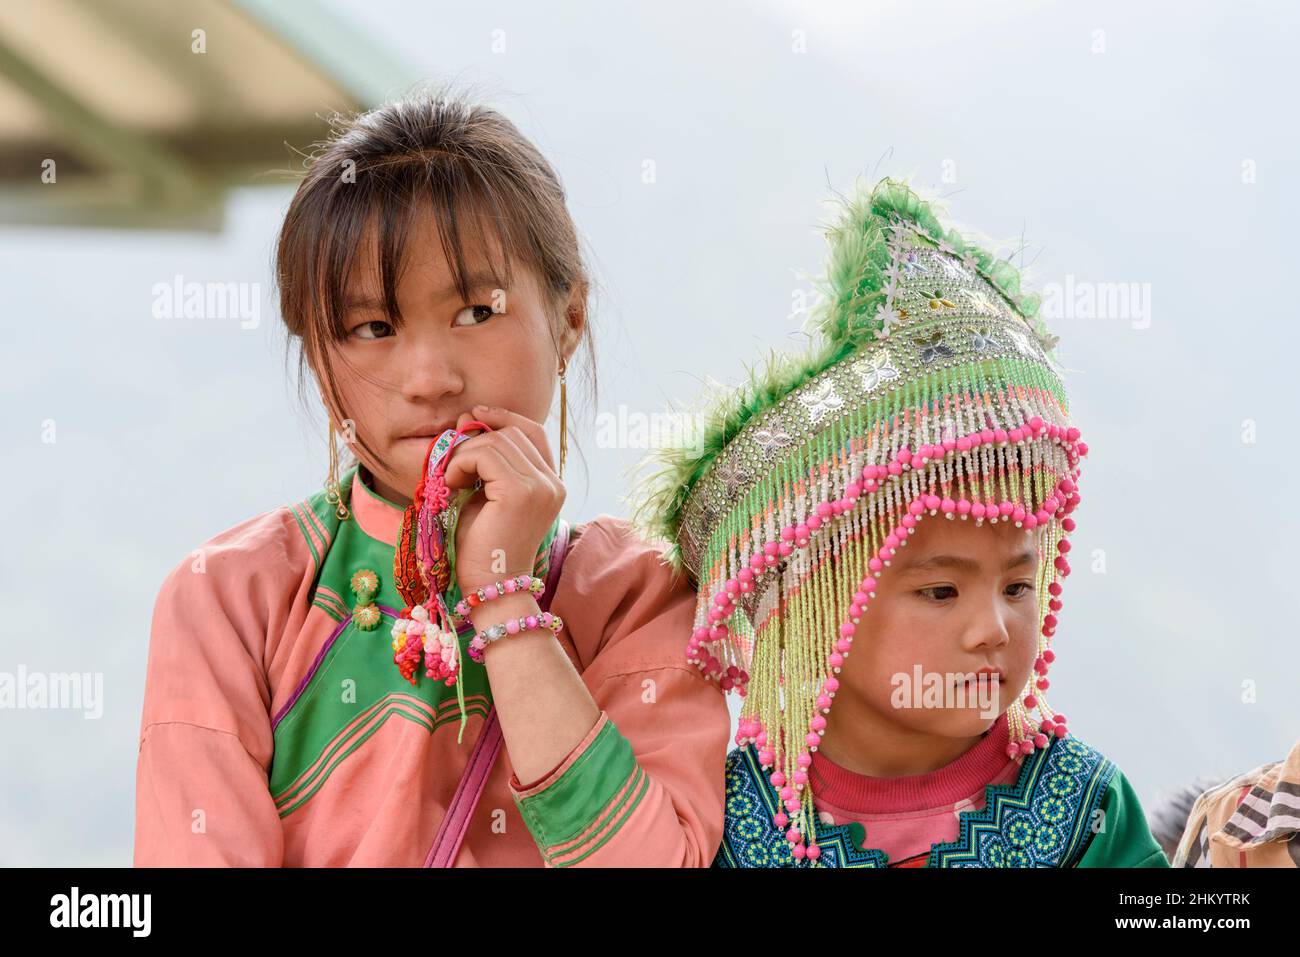 Two young girls wearing traditional Hmong tribe clothing in Cat Cat village, Sapa (Sa Pa), Lao Cai Province, Vietnam, Southeast Asia Stock Photo